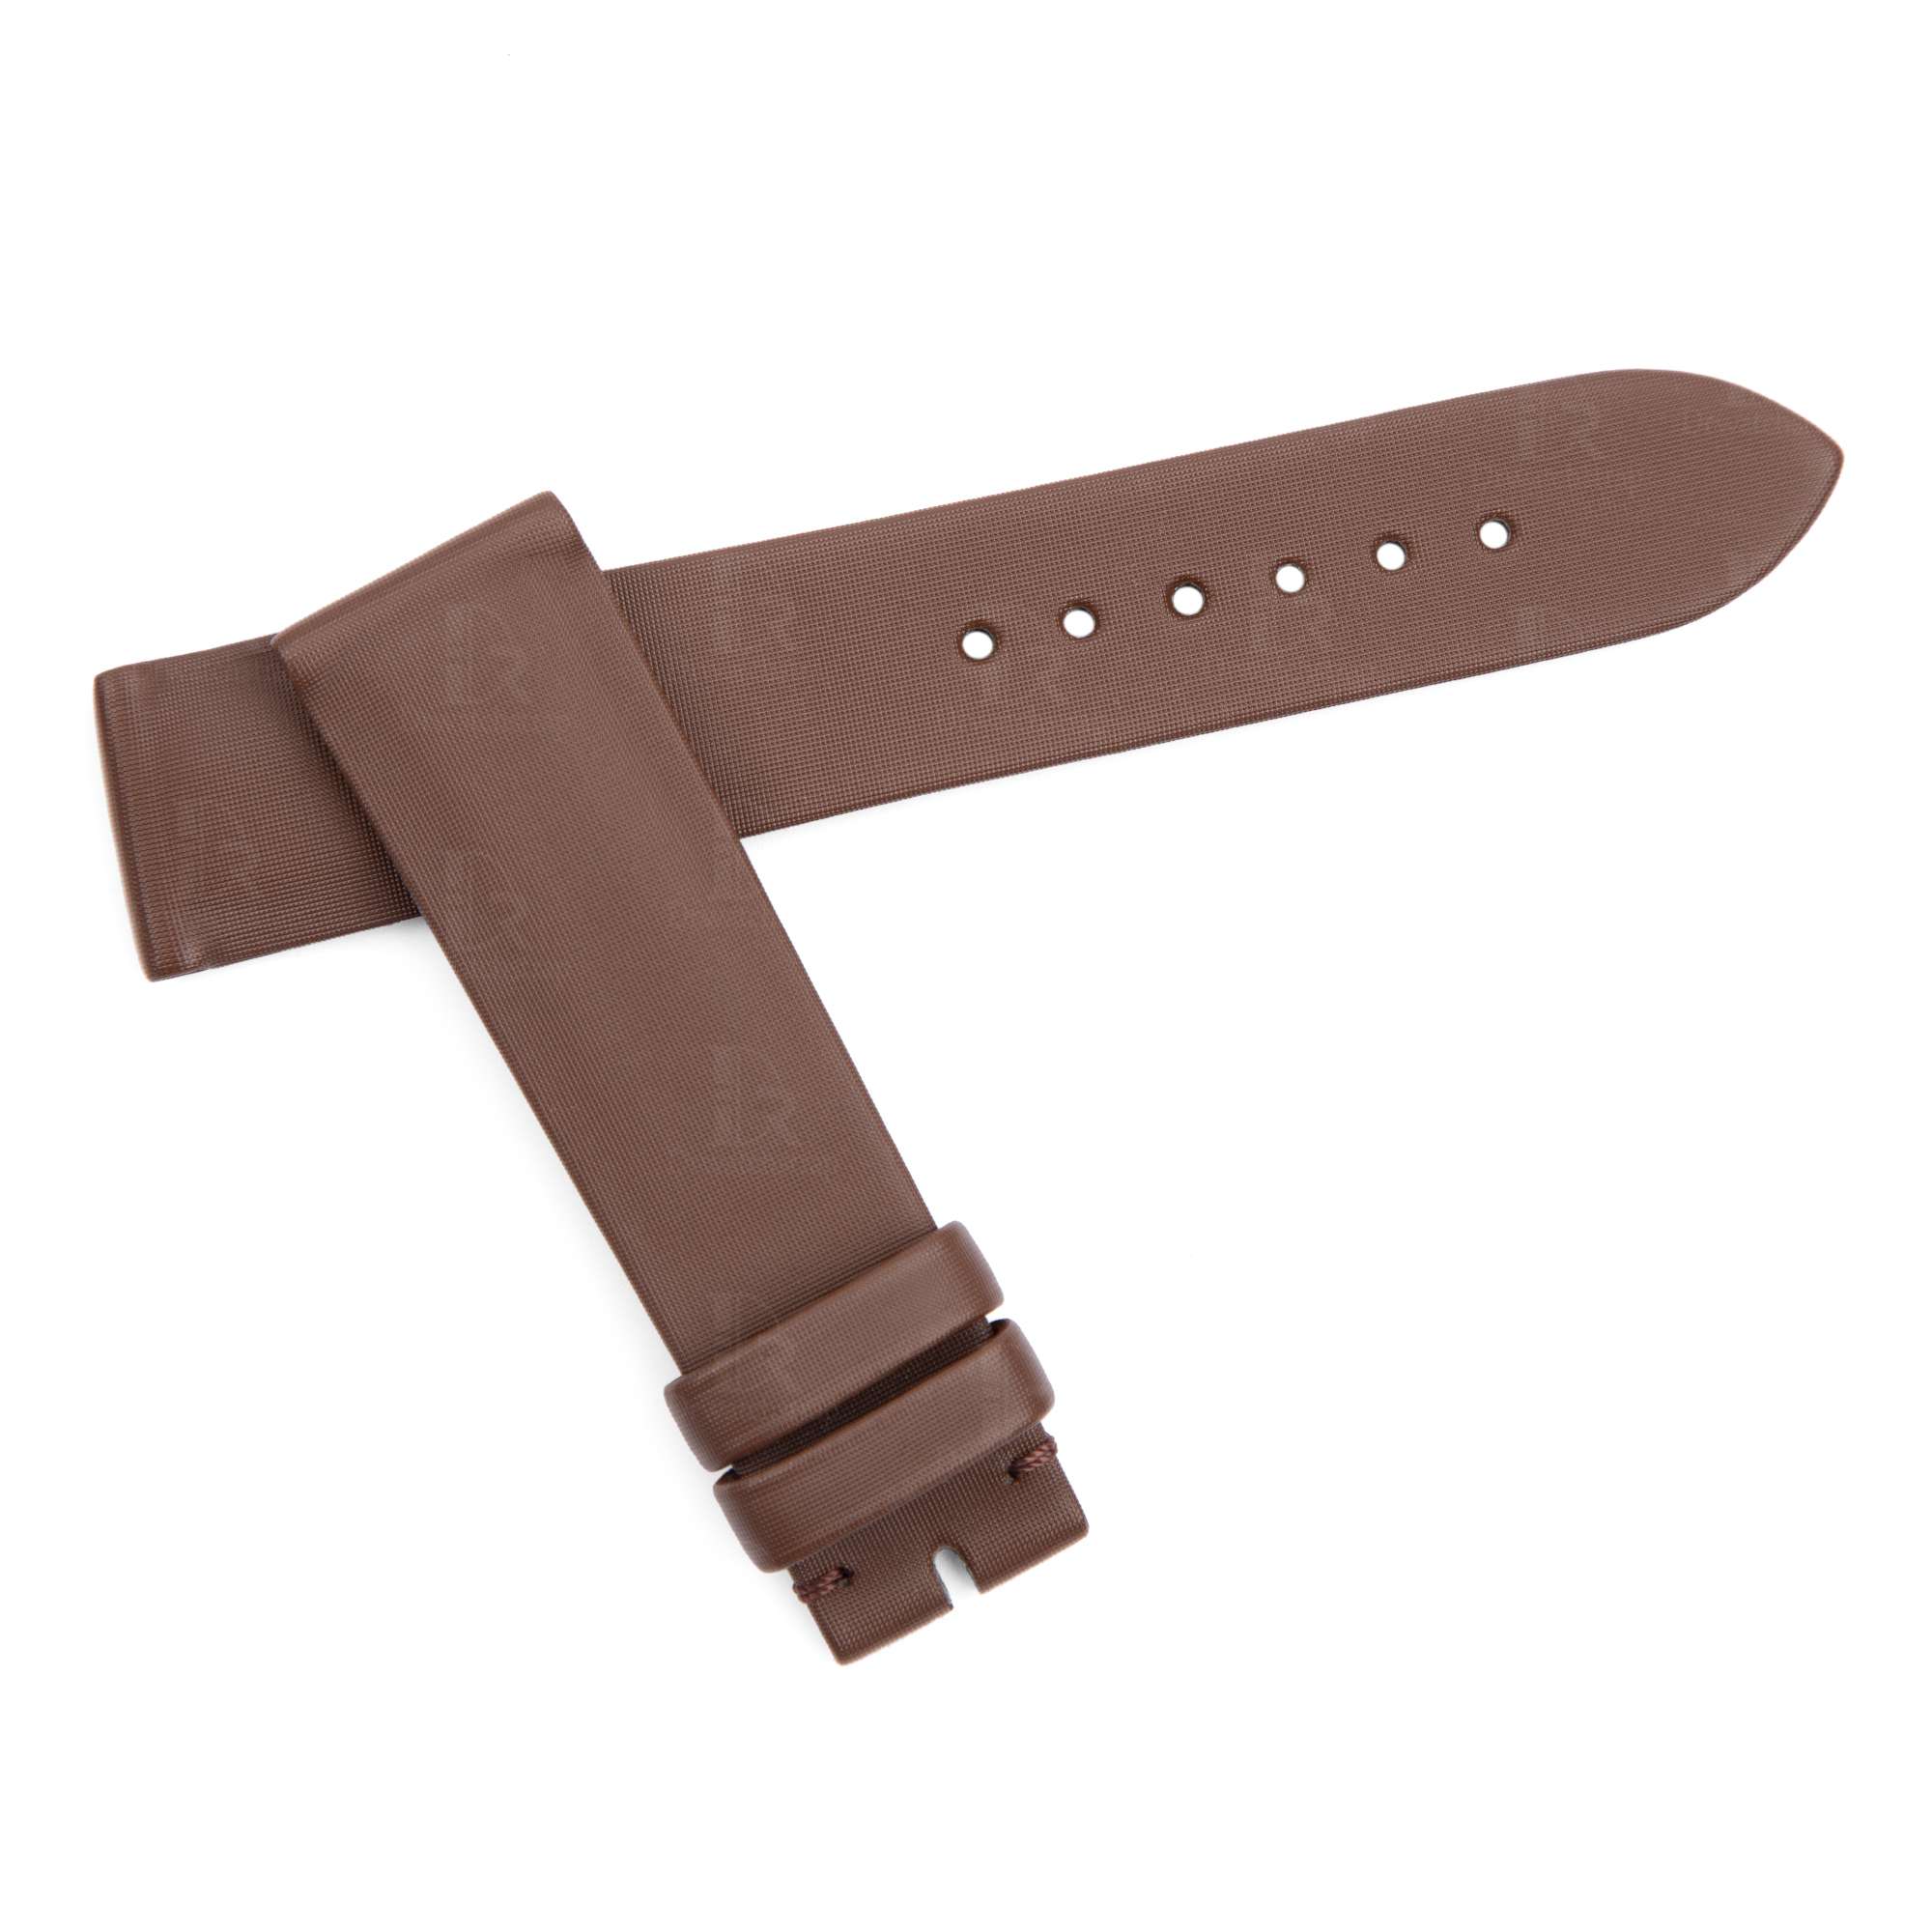 Best quality OEM premium Satin material brown leather watch straps and watch bands replacement for Glashutte Original Ladies Serenade luxury watches - Shop high-end handmade satin strap and watchband at a low price